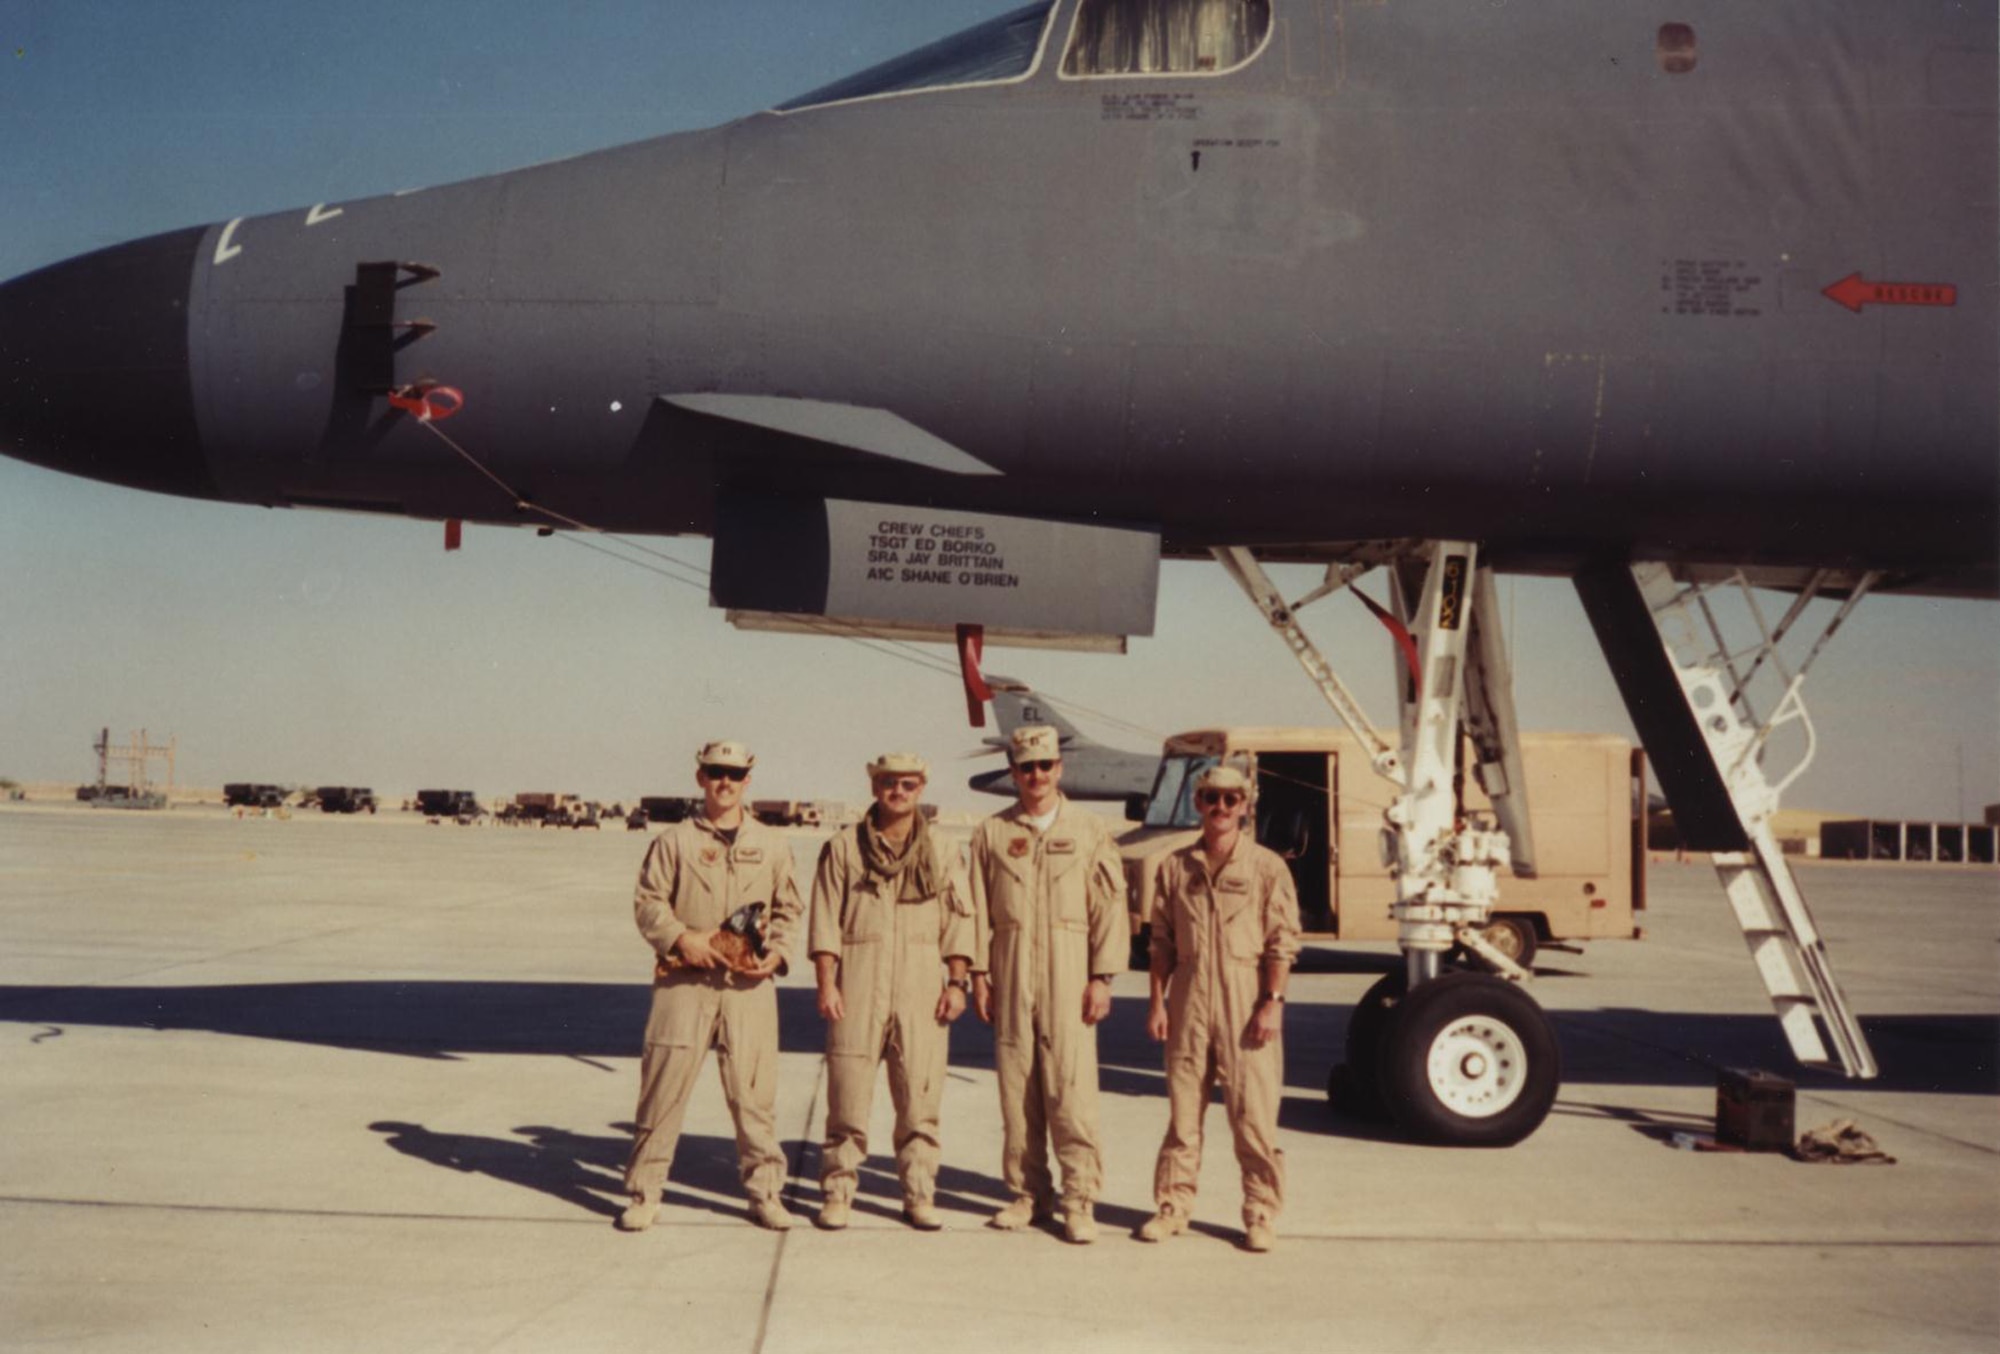 (From left to right) Captains John Martin, Joe Reidy, Jeffrey Taliaferro and Randy Kaufman stand in front of 37th Bomb Squadron aircraft number 86-0102 during Operation Desert Fox on the flightline at Thumrait Air Base, Oman, Dec. 19, 1998. Nicknamed "Moon Doggie" at the time, the side of 86-0102 is freshly painted with a single black bomb after the crew's drop on the preceding night. (Lt. Col. John Martin courtesy photo/Released)